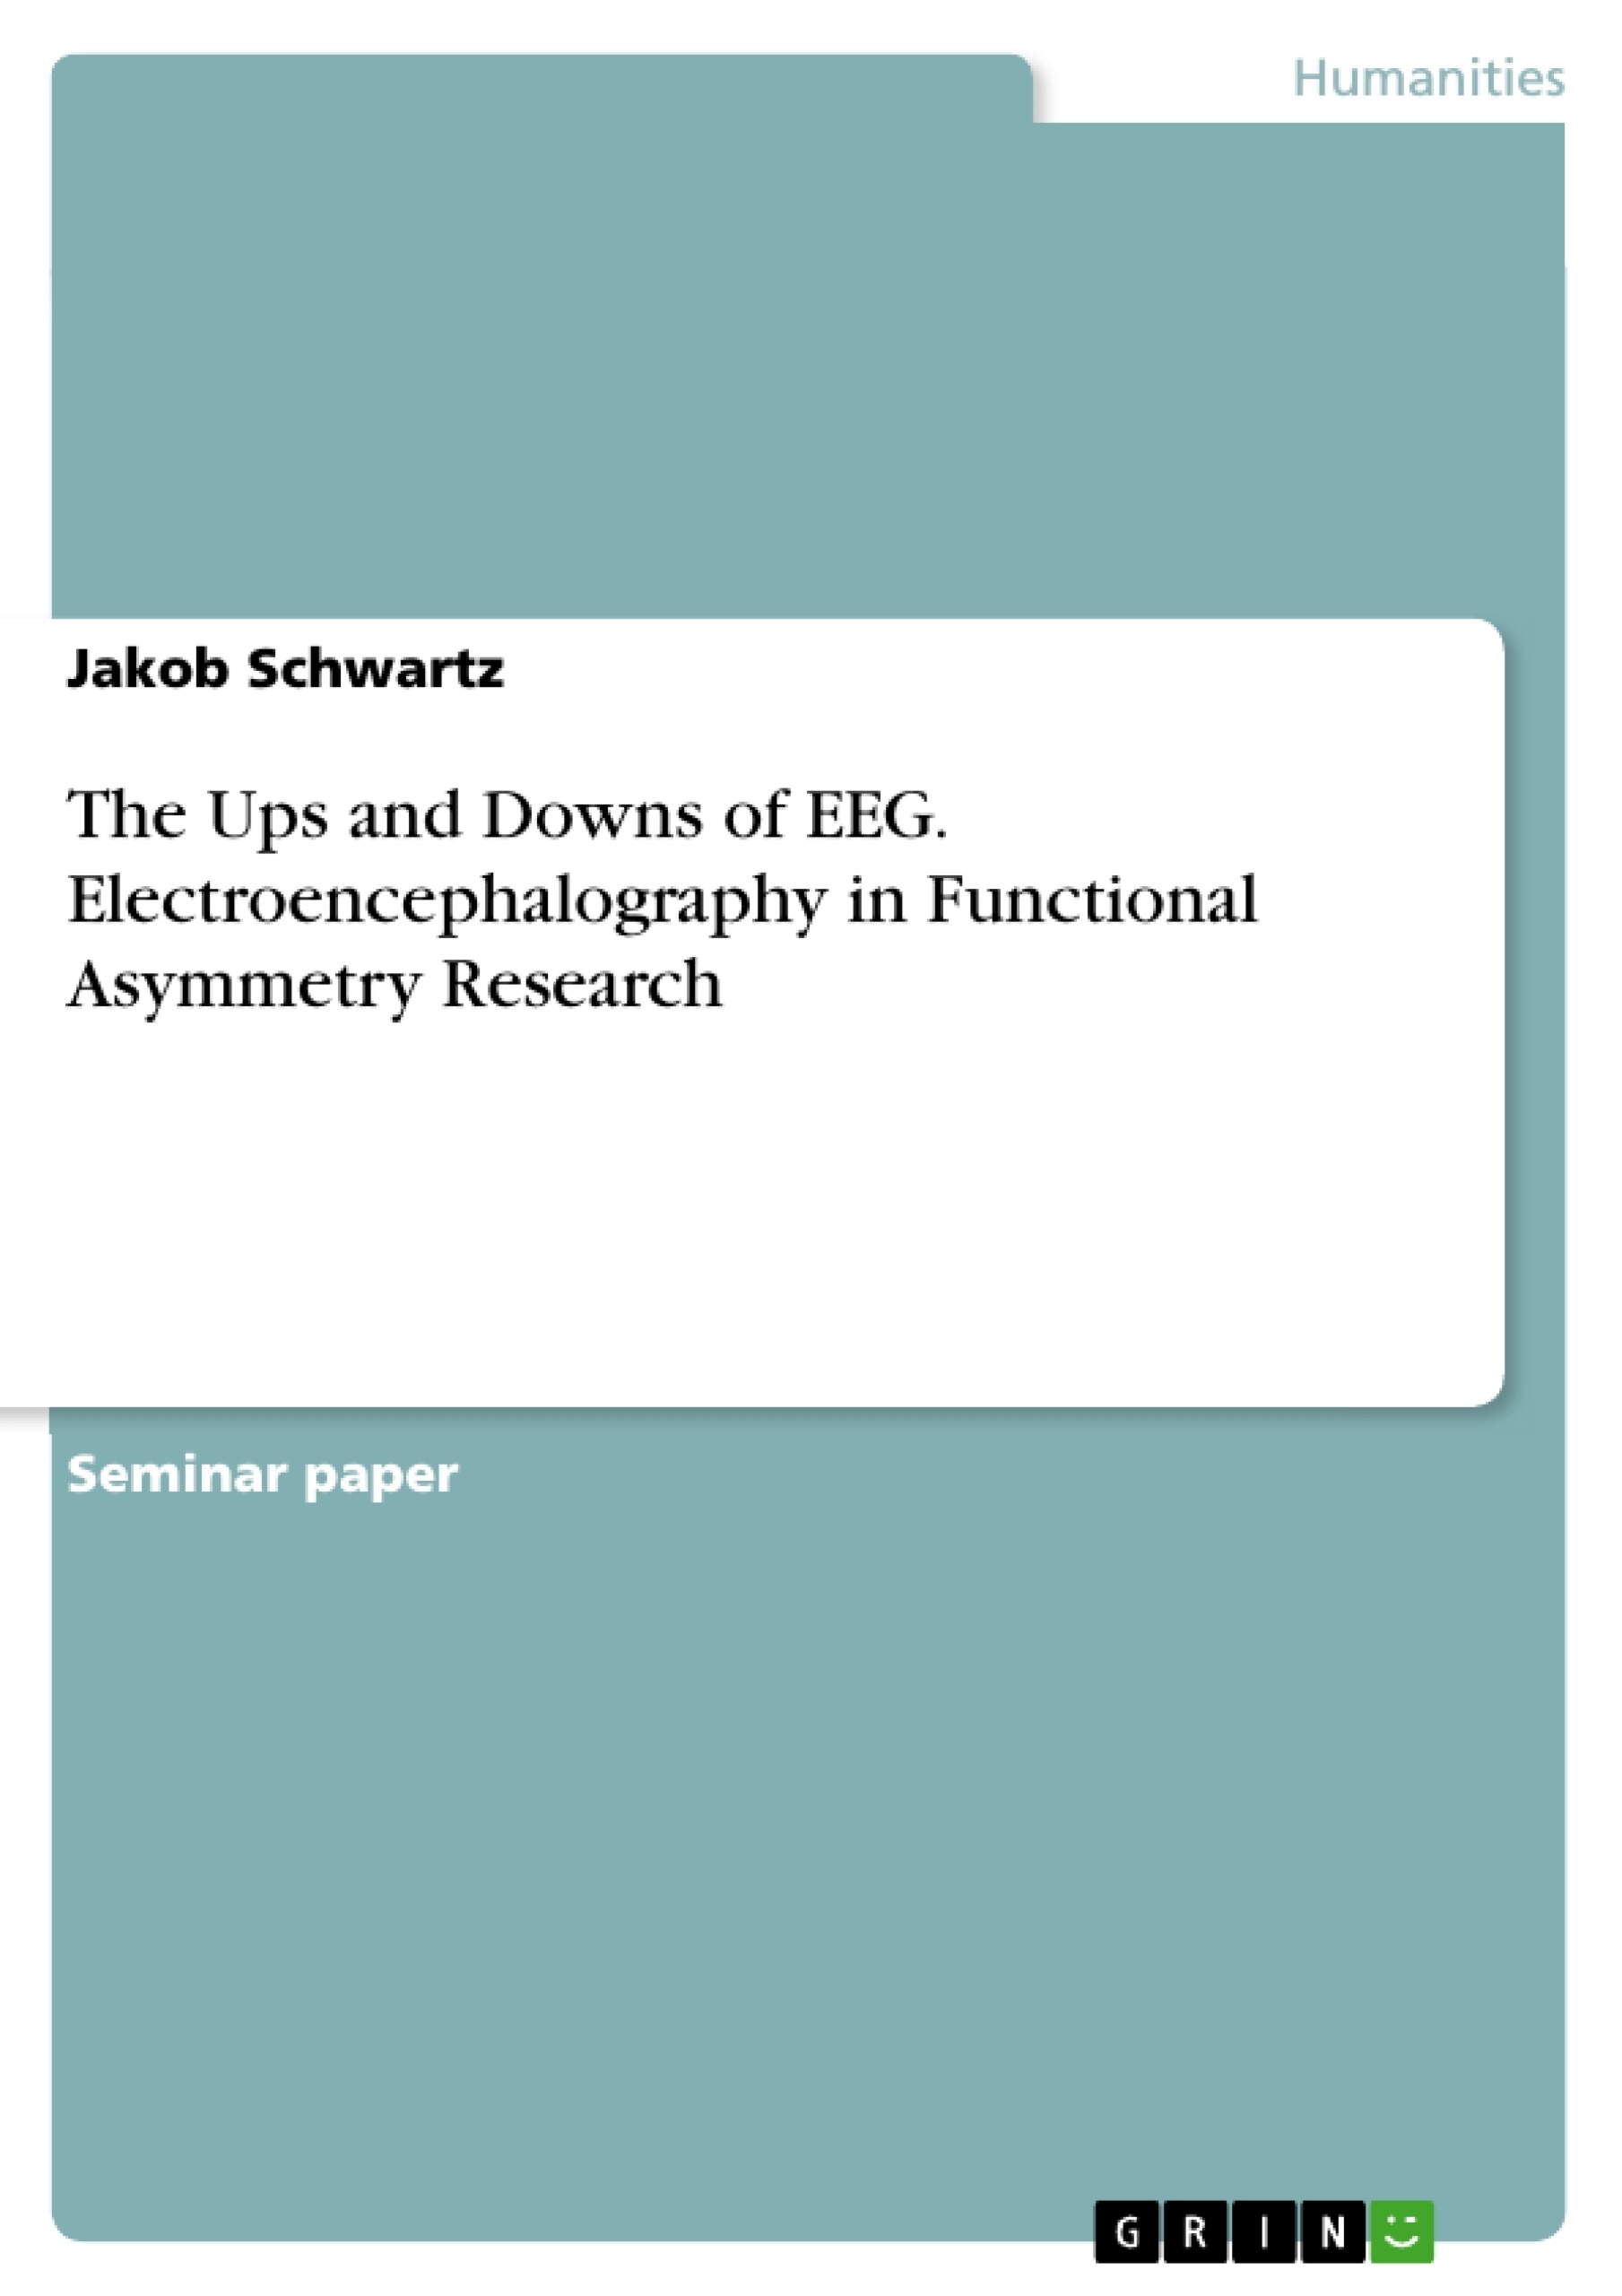 Título: The Ups and Downs of EEG. Electroencephalography in Functional Asymmetry Research